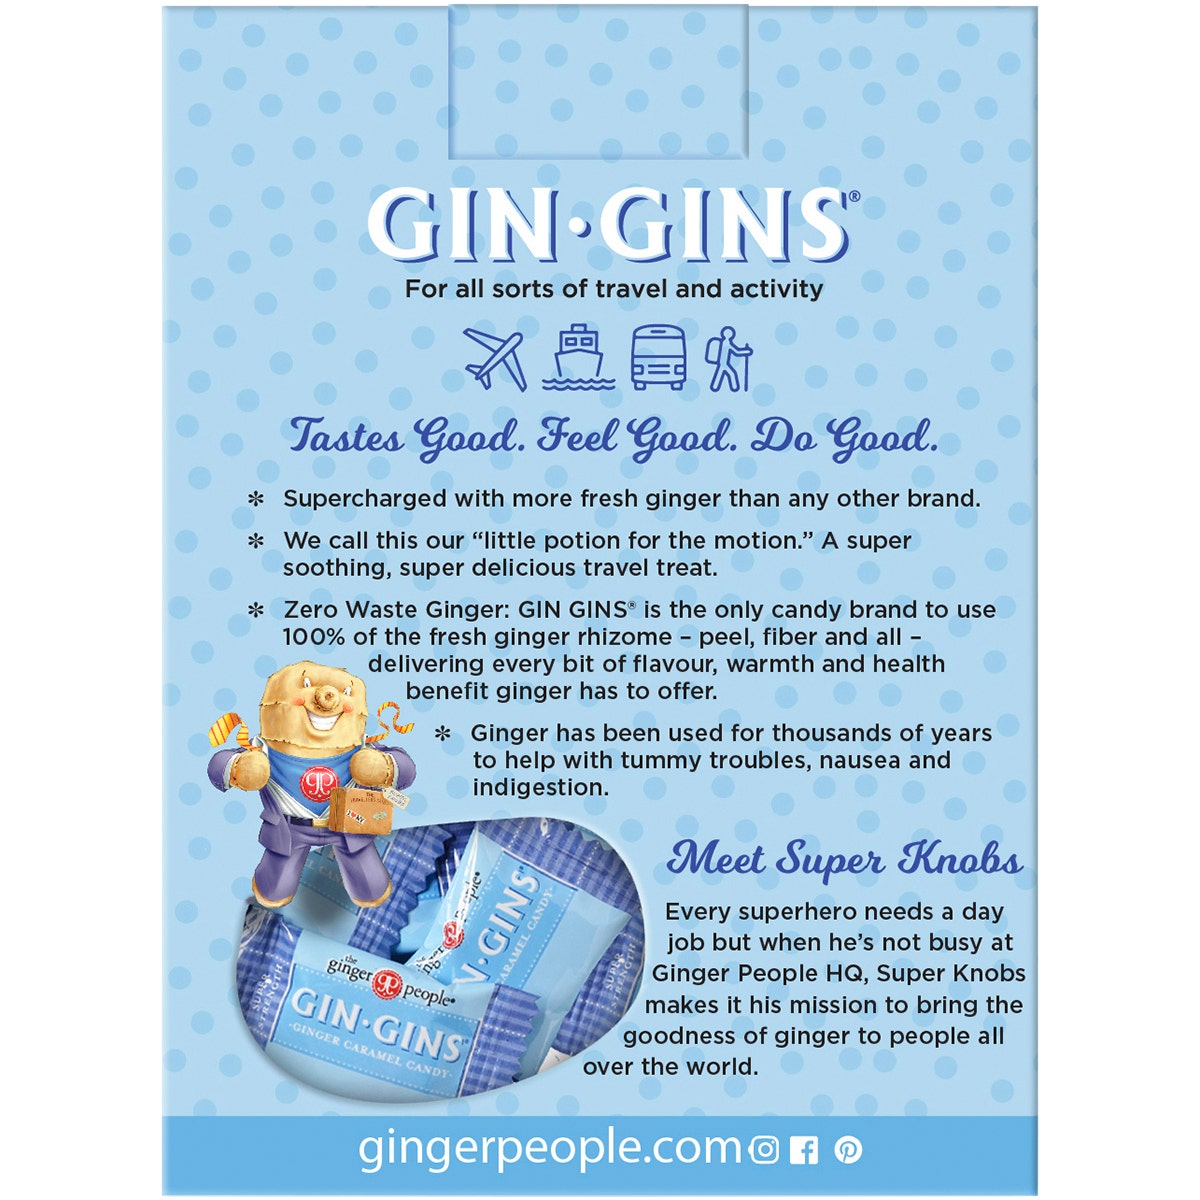 The Ginger People Gin Gins Super Strength Ginger Candy